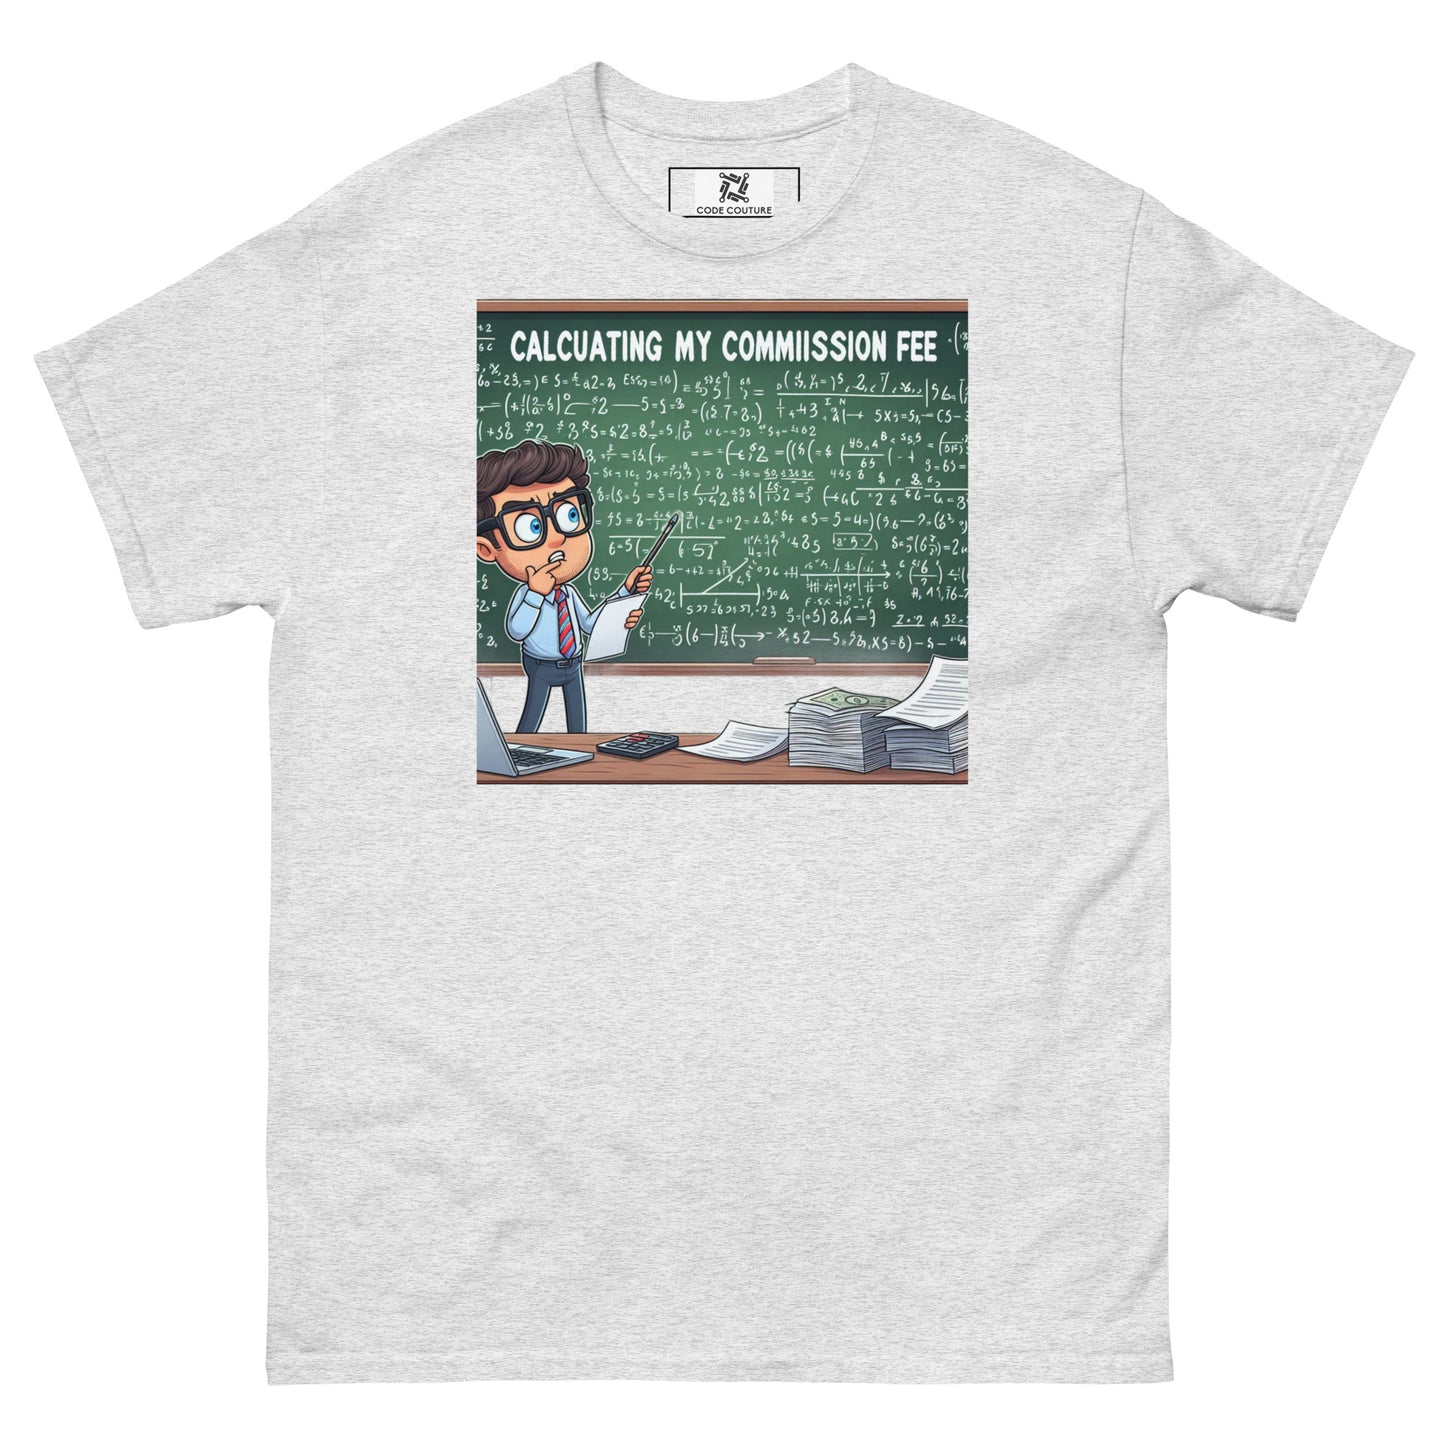 Calculating Commission Fee tee